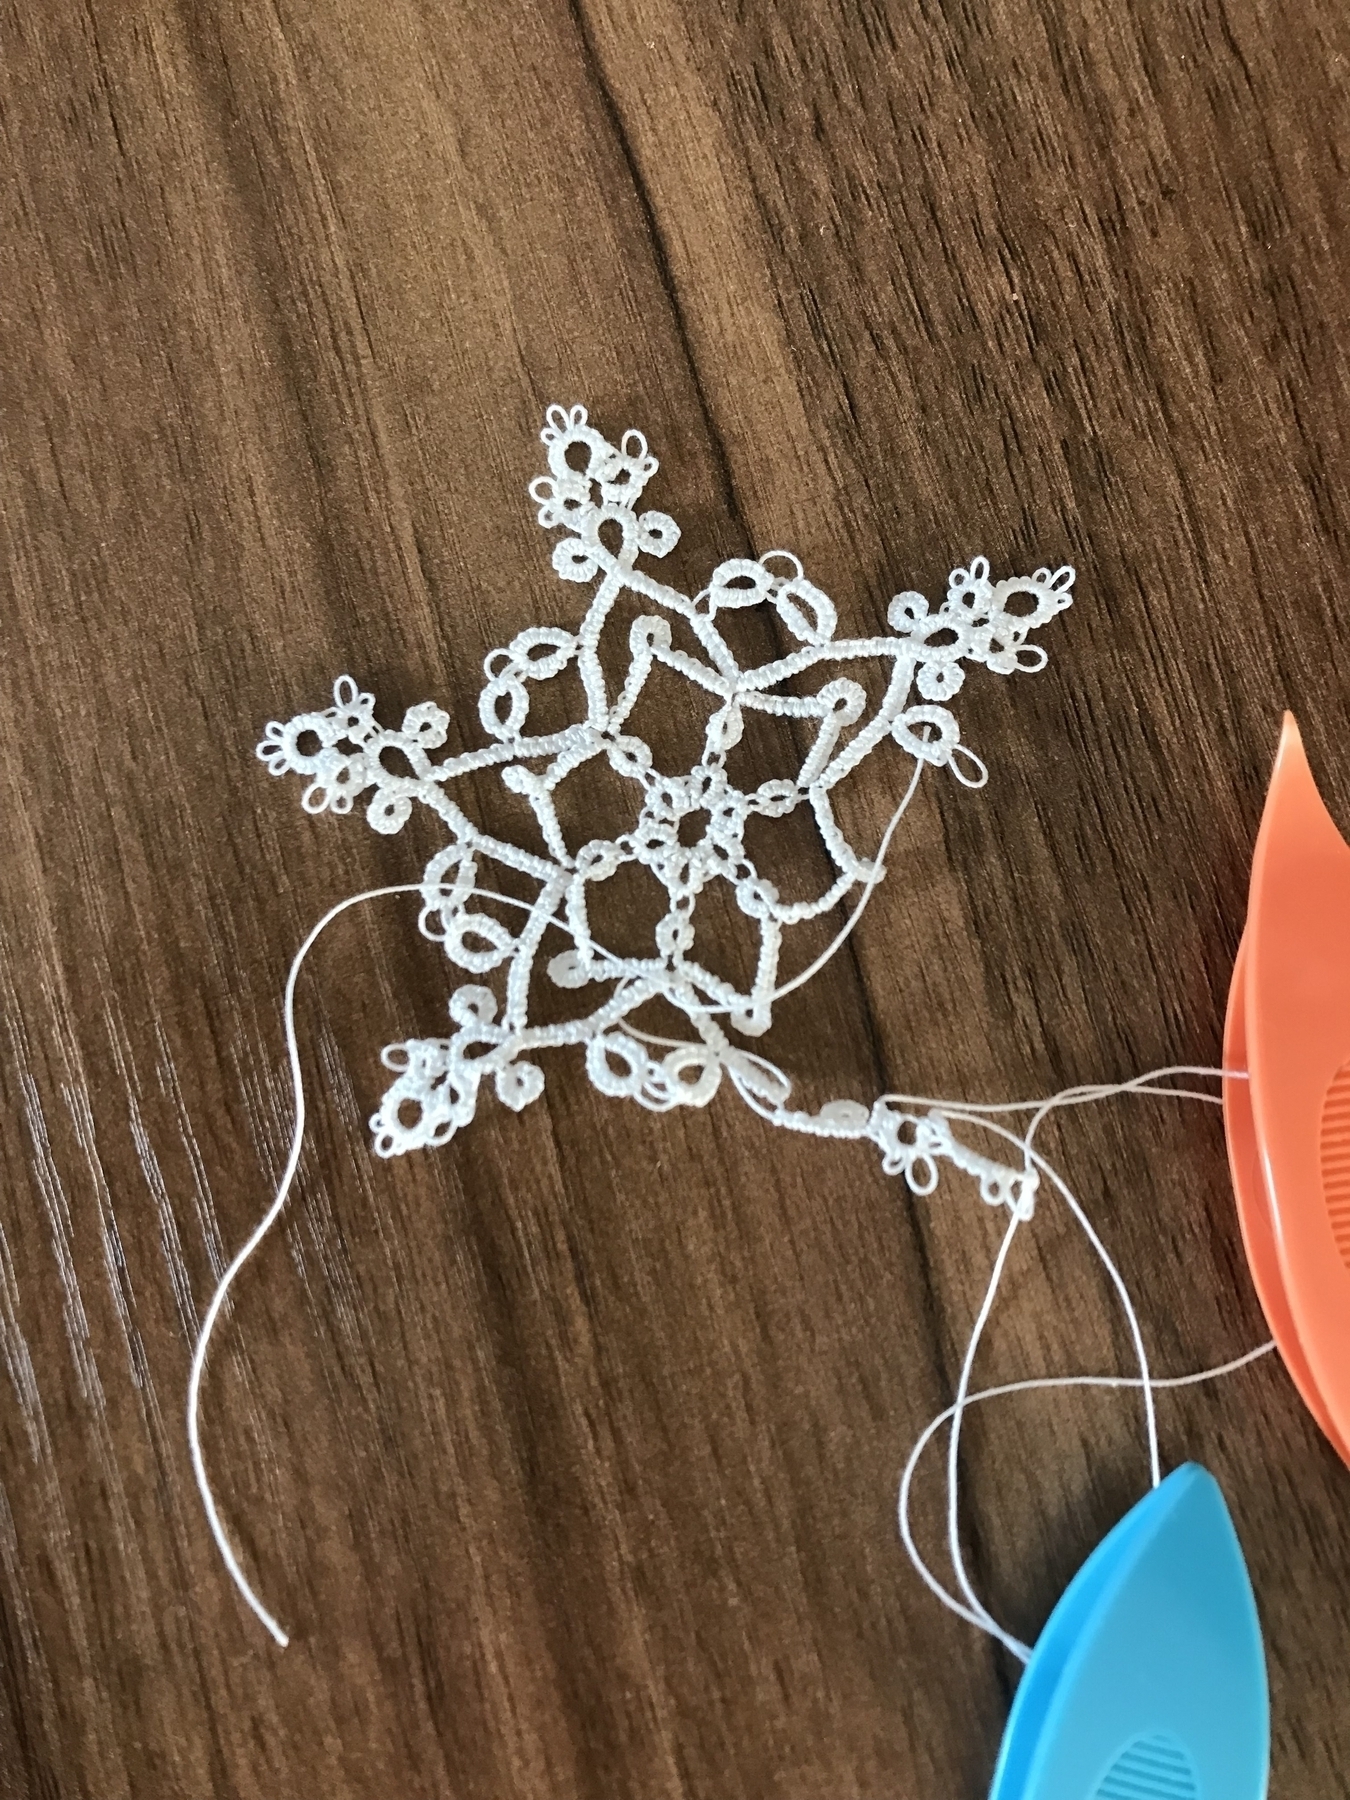 half-finished tatted white snowflake on a desk, with the shuttles still attached”></p>

        </div>
      </li>
    
      <li class=